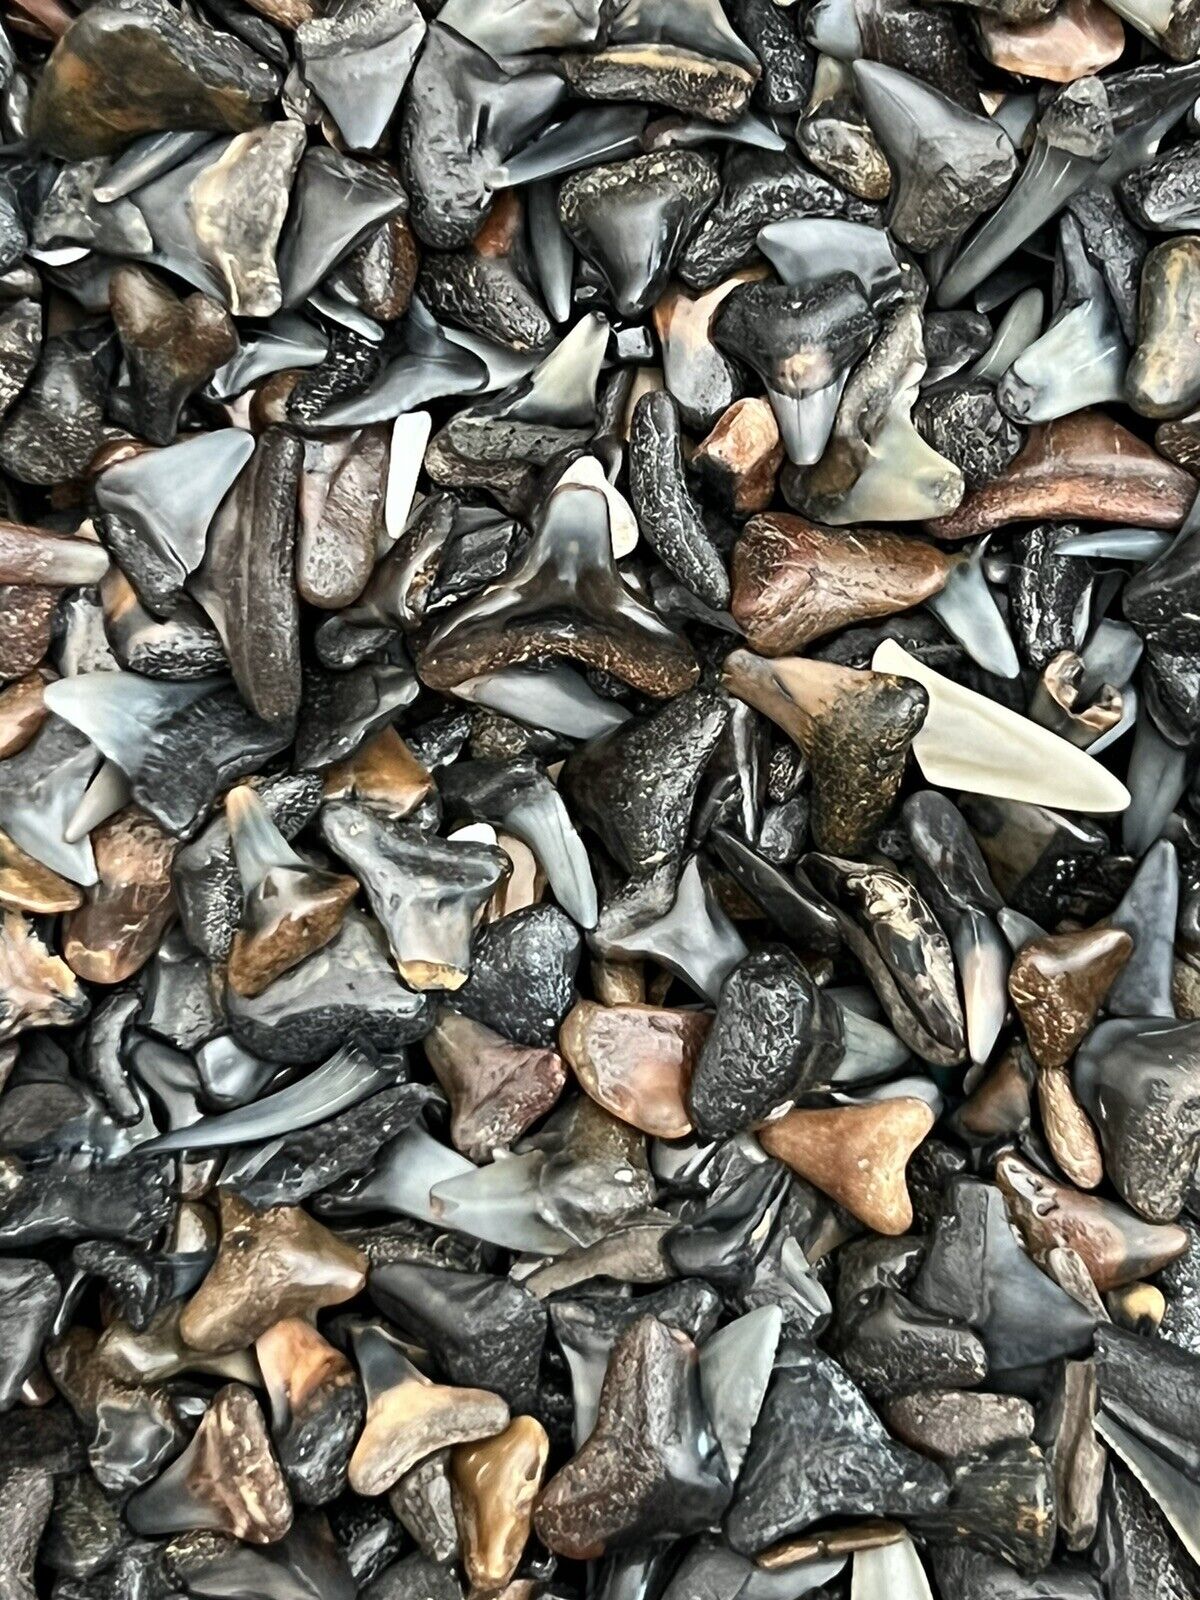 LOT OF 50 FOSSILIZED ( PARTIAL ) SHARK TEETH FROM VENICE FLORIDA.